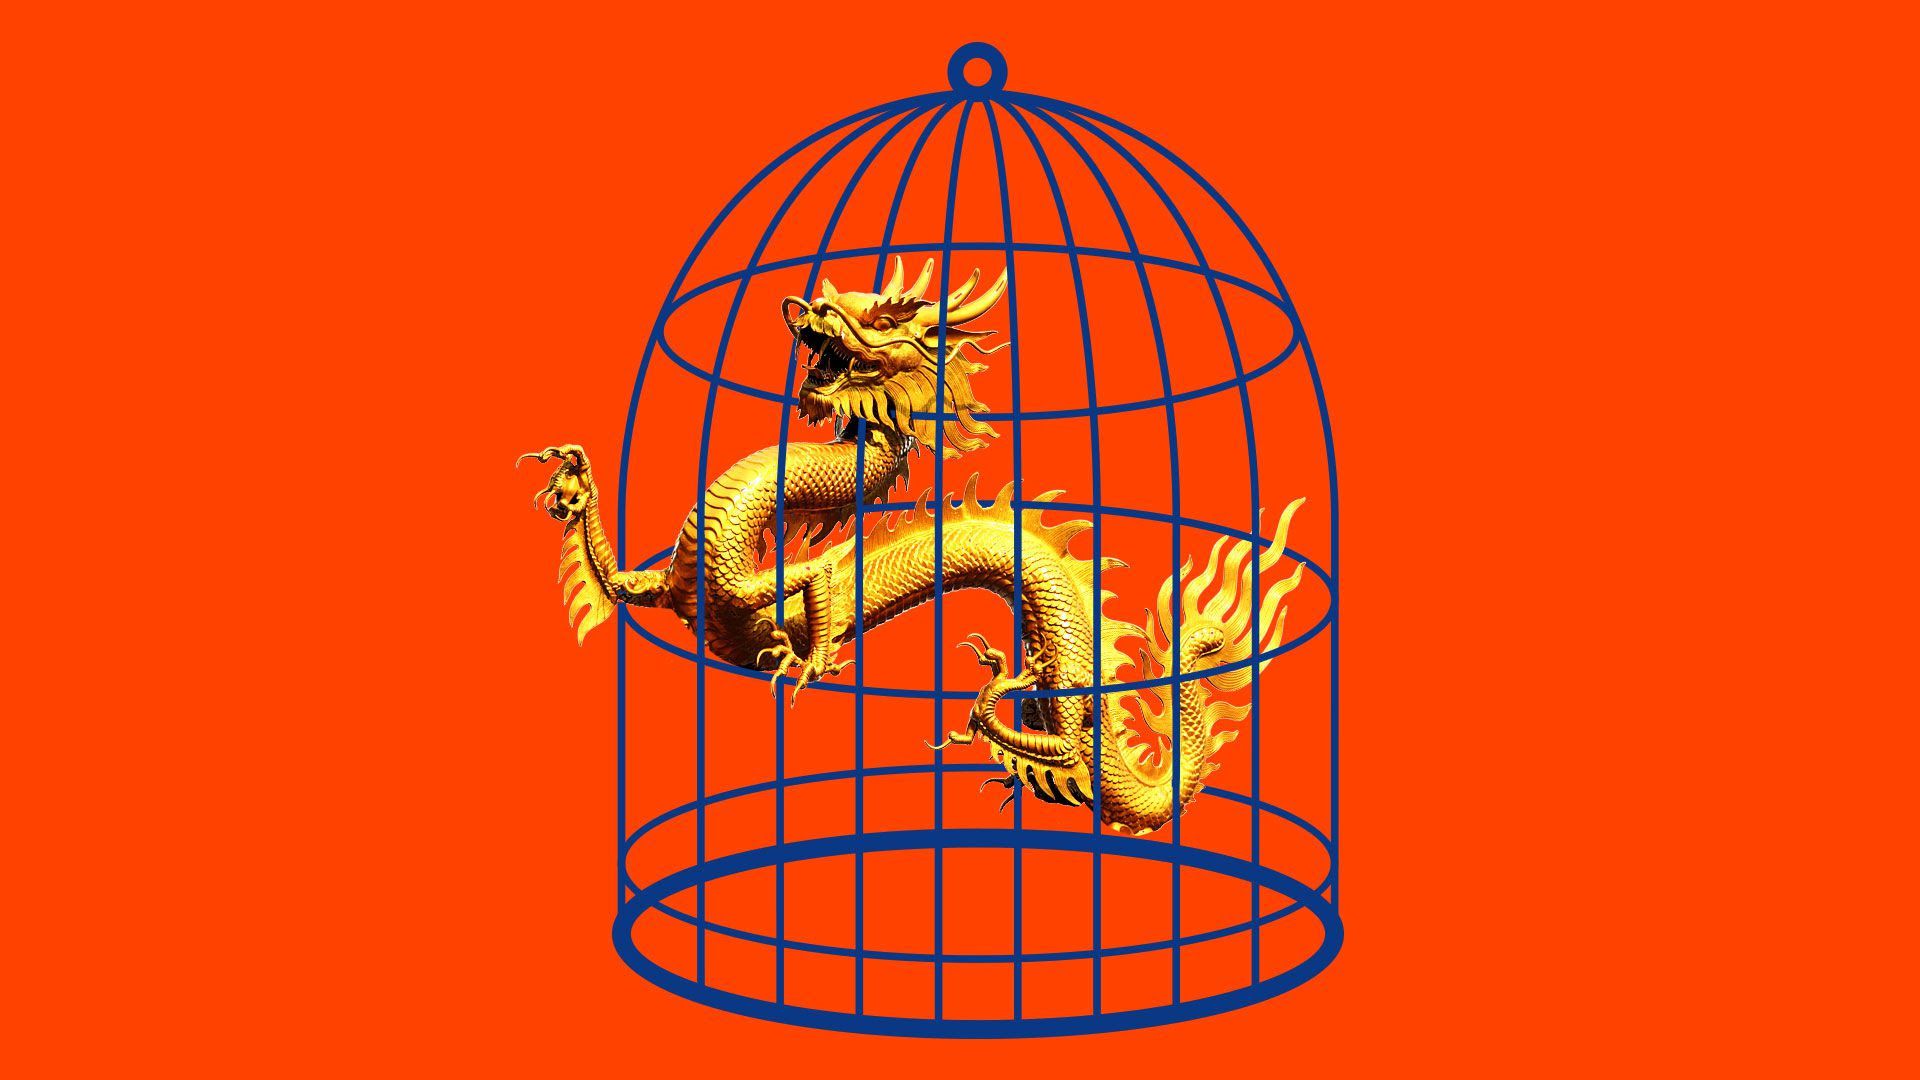 An illustration of a Chinese dragon caught in a cage